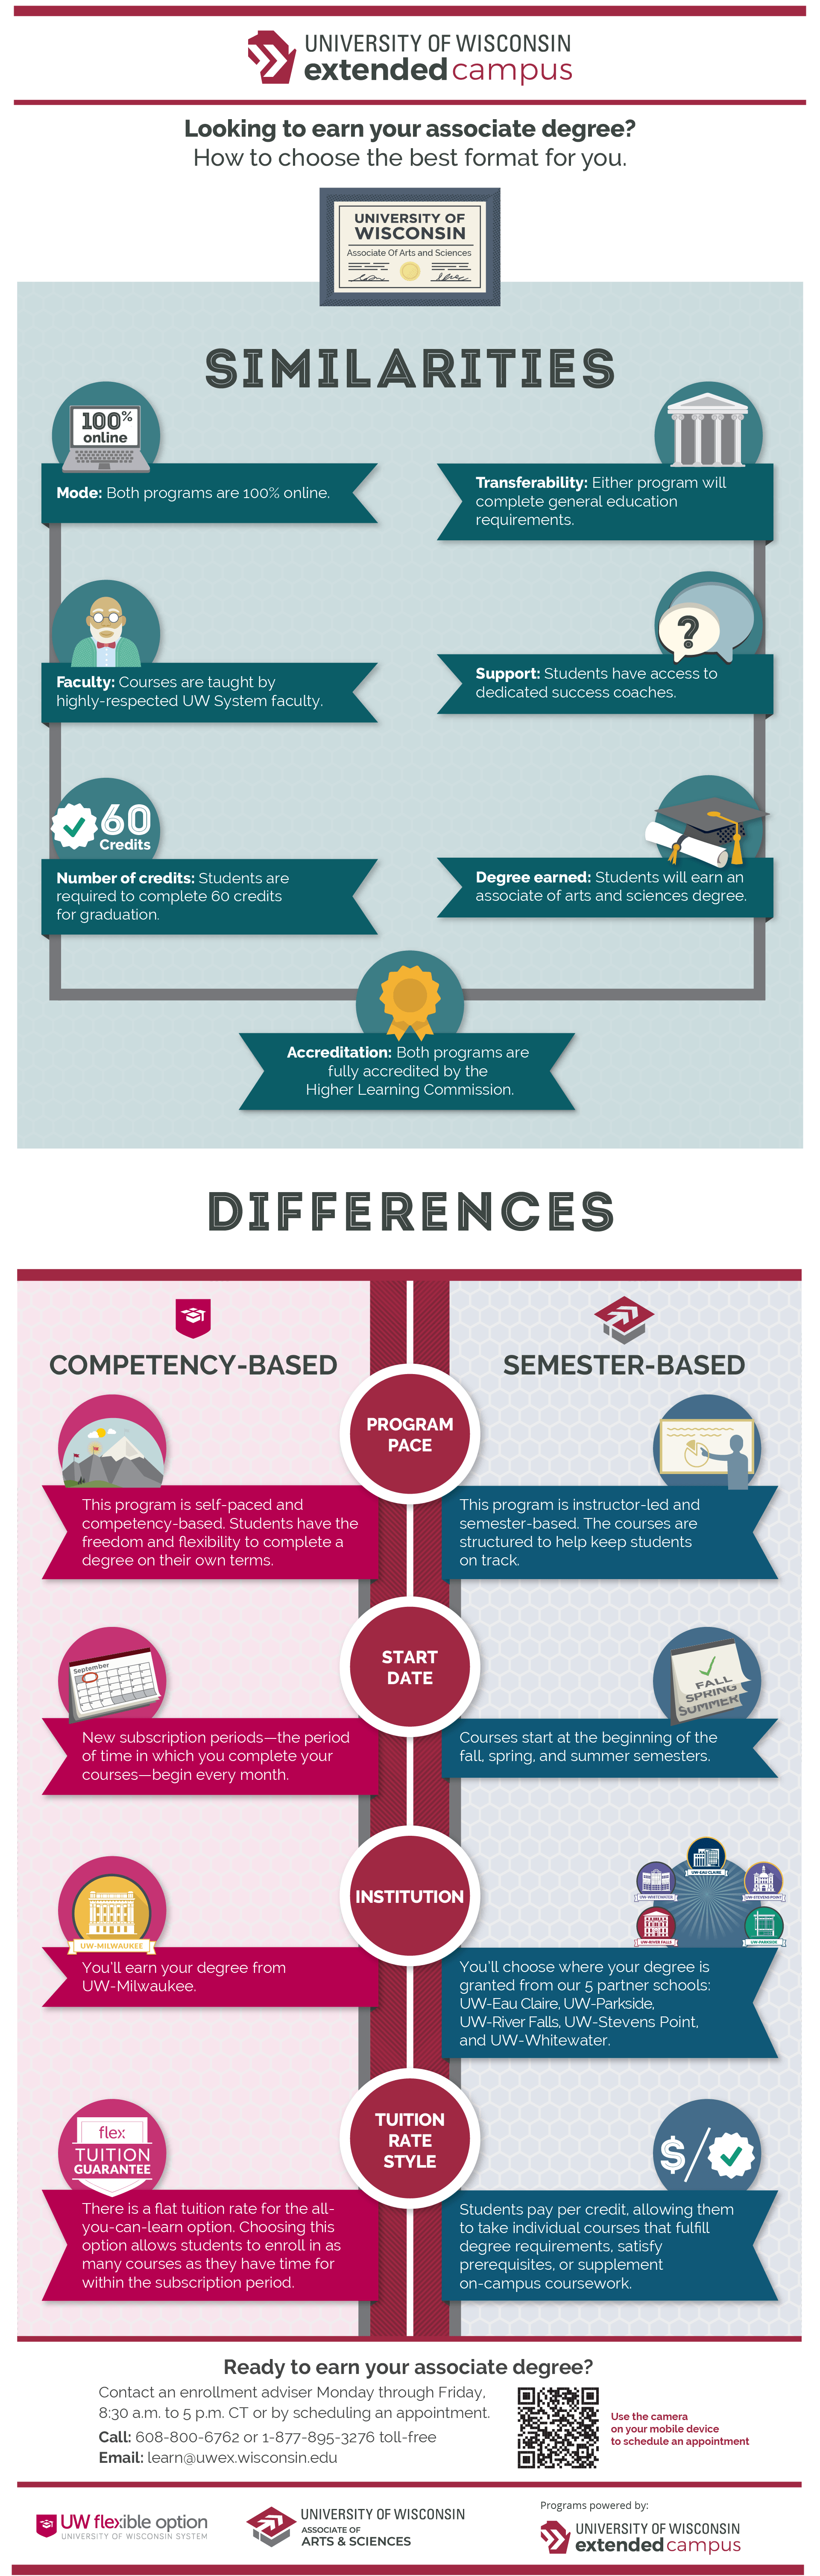 Infographic: Competency vs Semester-based learning